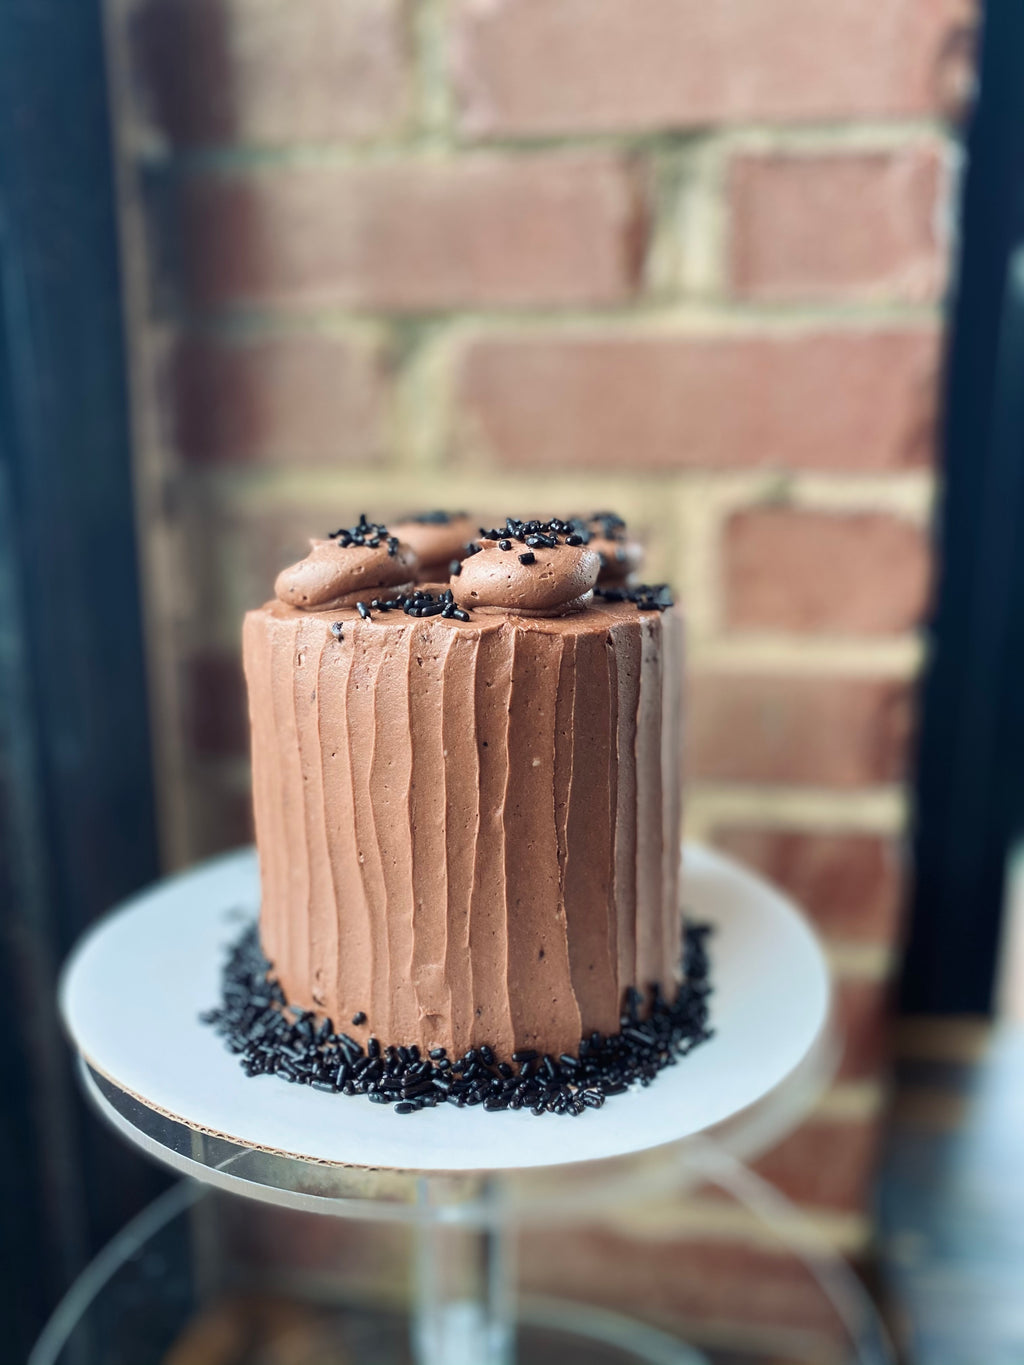 Chocolate cake with chocolate buttercream frosting.